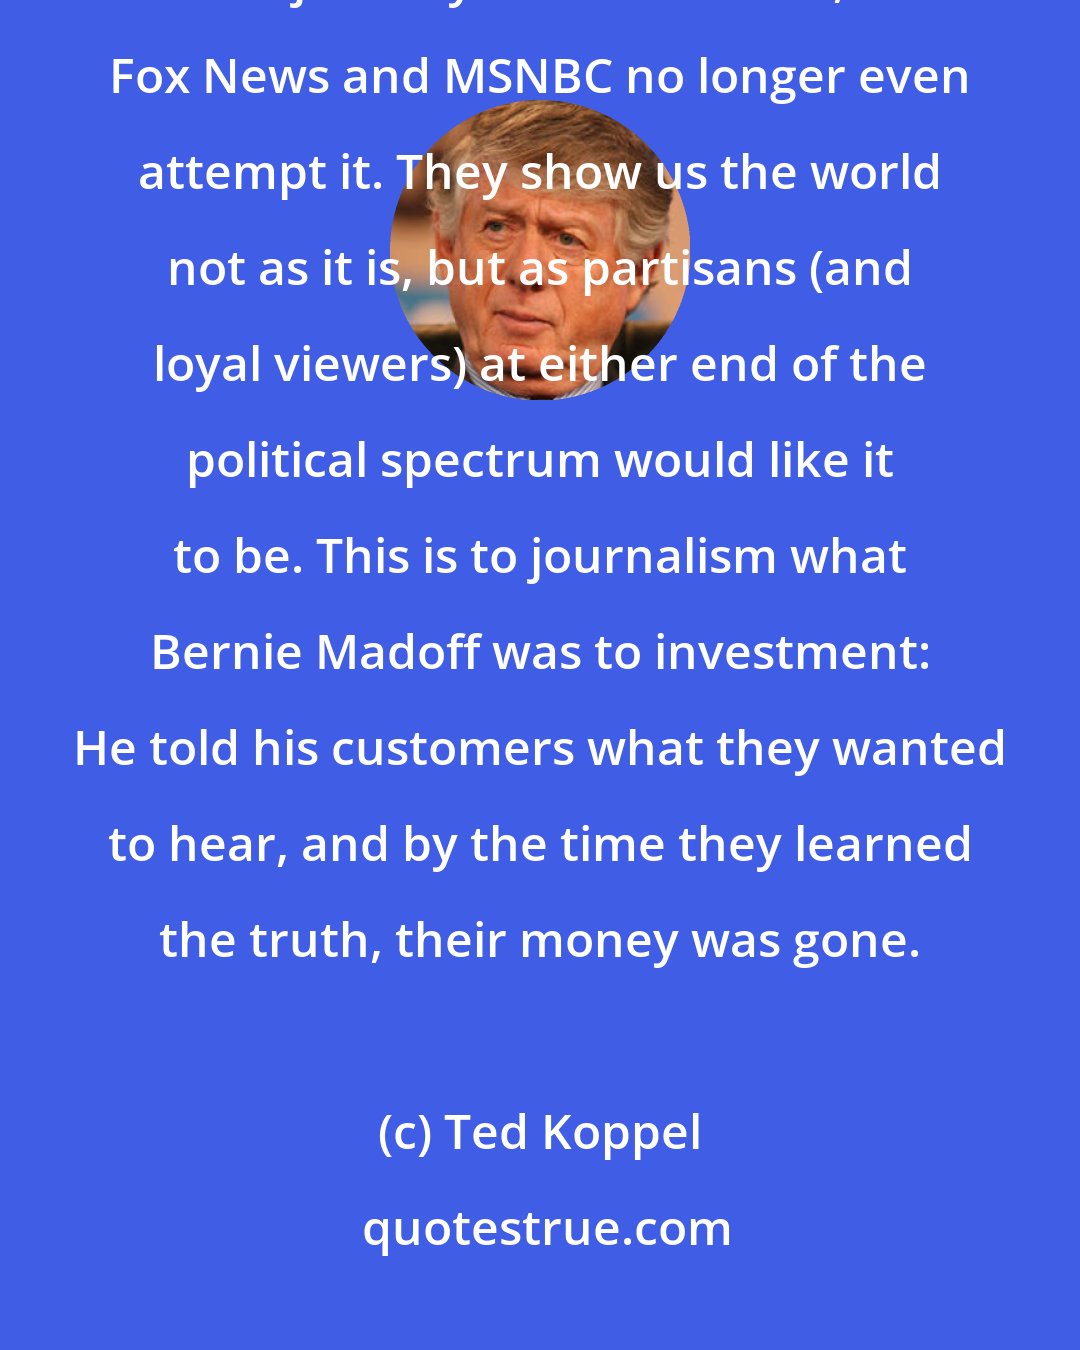 Ted Koppel: Beginning, perhaps, from the reasonable perspective that absolute objectivity is unattainable, Fox News and MSNBC no longer even attempt it. They show us the world not as it is, but as partisans (and loyal viewers) at either end of the political spectrum would like it to be. This is to journalism what Bernie Madoff was to investment: He told his customers what they wanted to hear, and by the time they learned the truth, their money was gone.